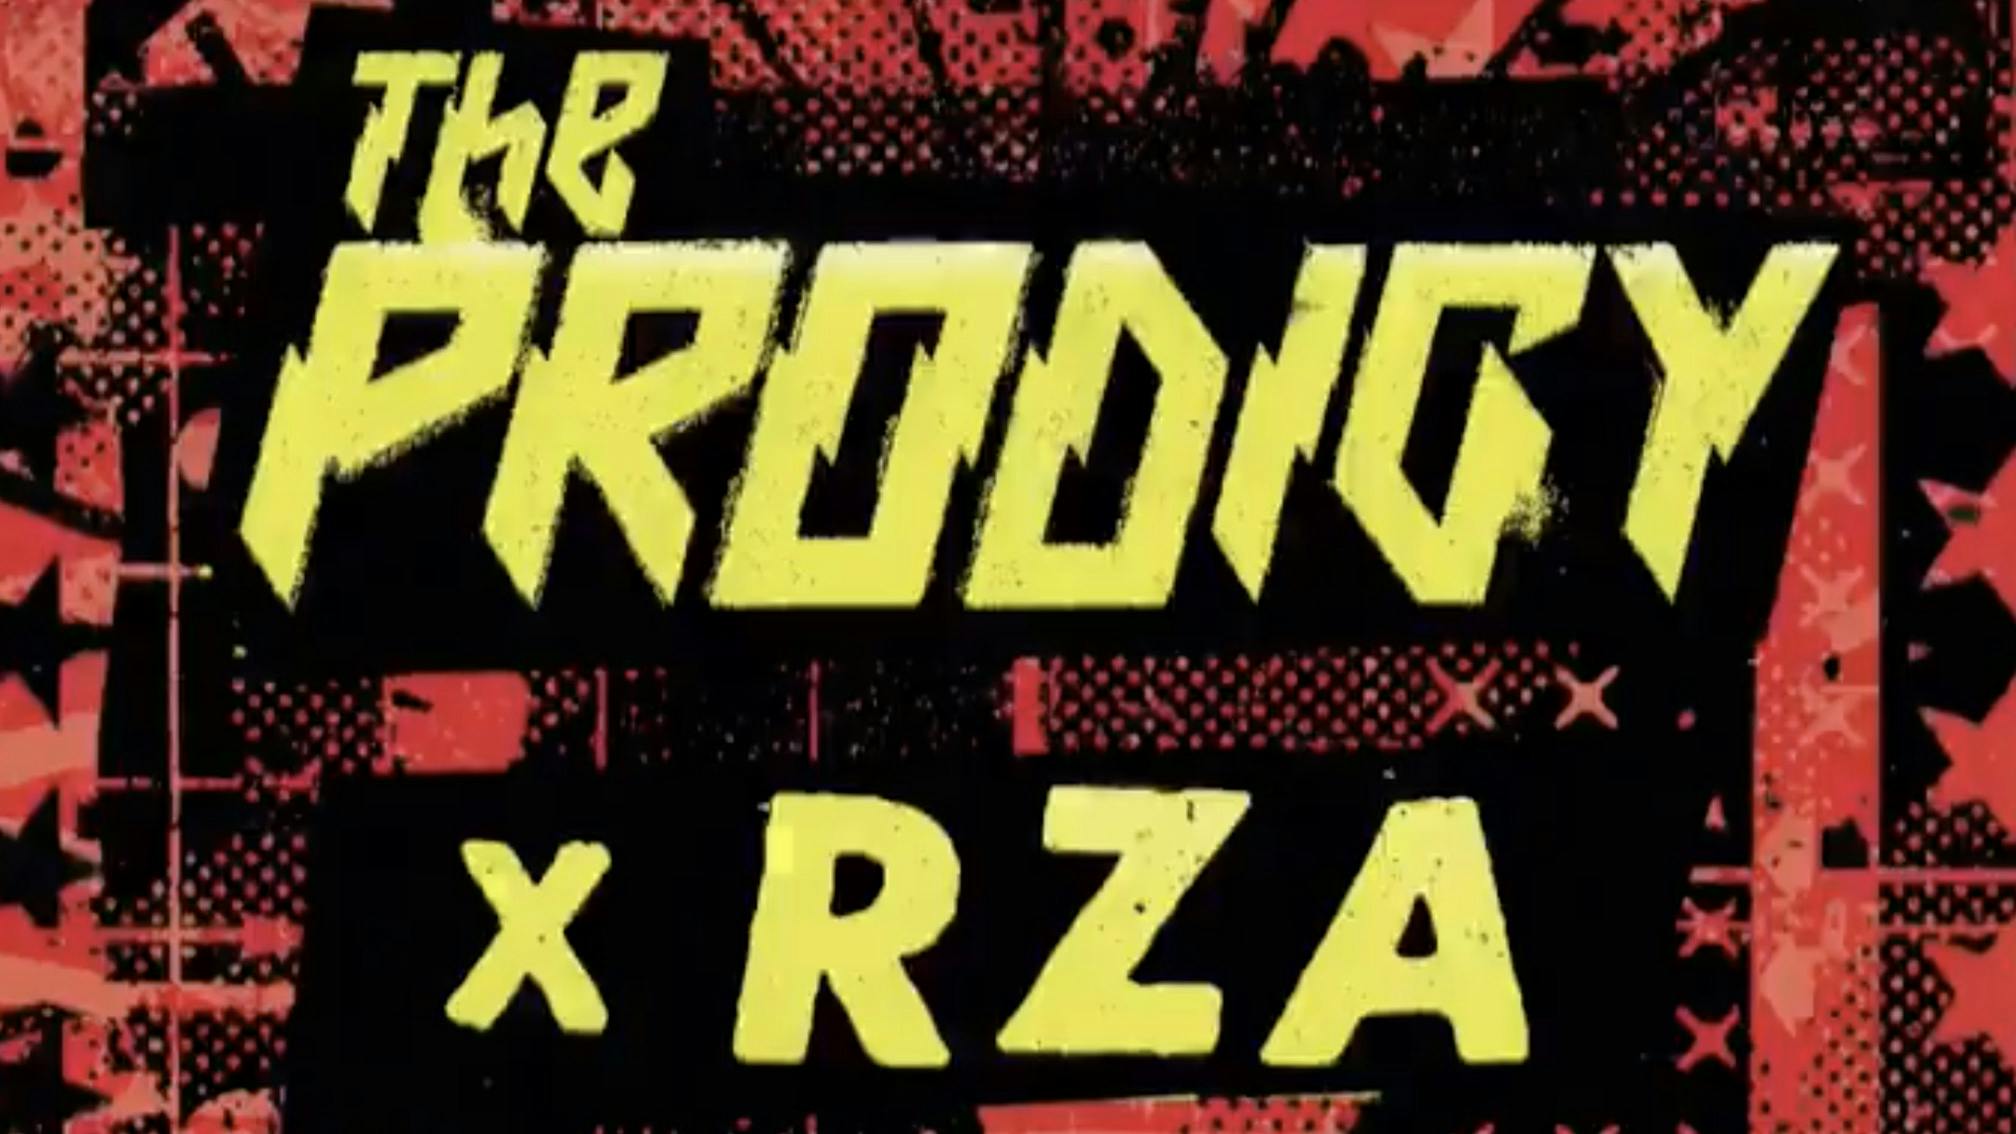 Hear Wu-Tang Clan's RZA join forces with The Prodigy on reworked Breathe